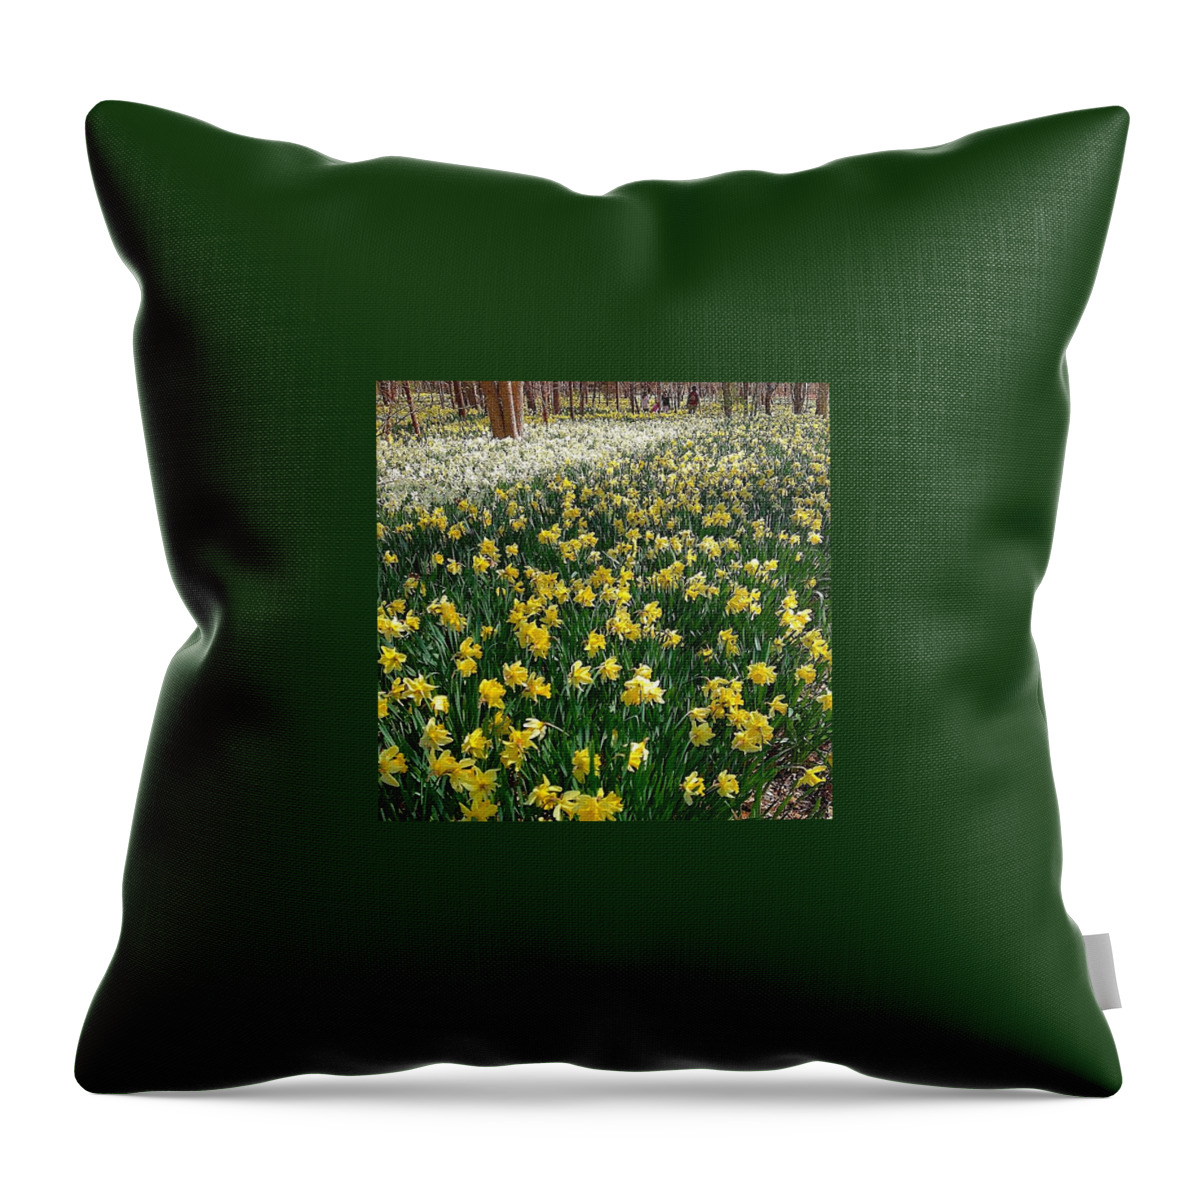 Southcoast Throw Pillow featuring the photograph A Spring Of Hope by Kate Arsenault 